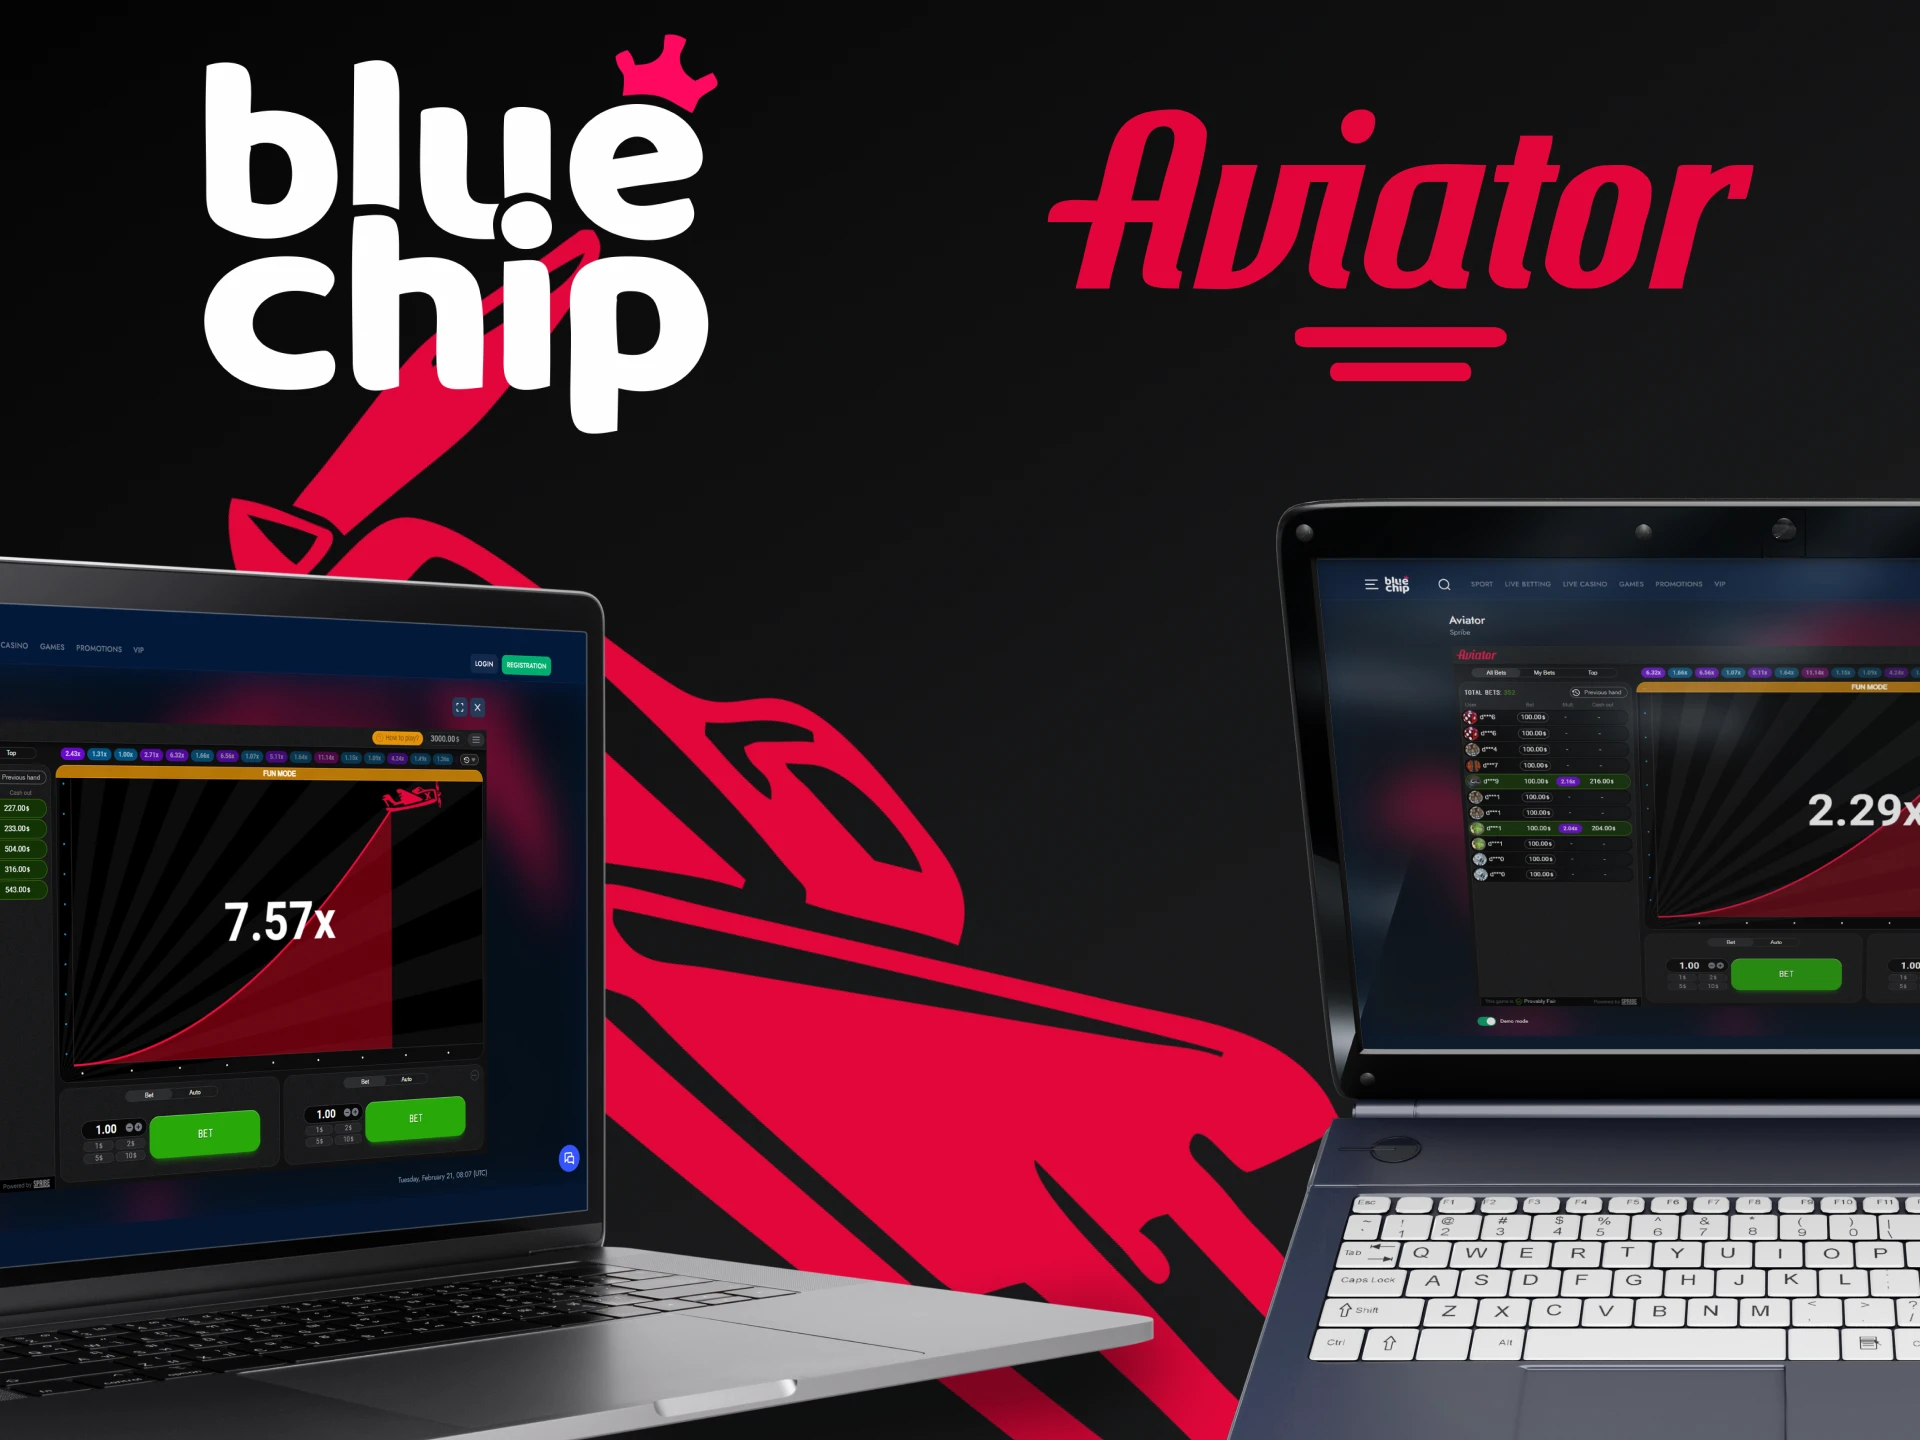 Choose your device to play Bluechip Aviator.